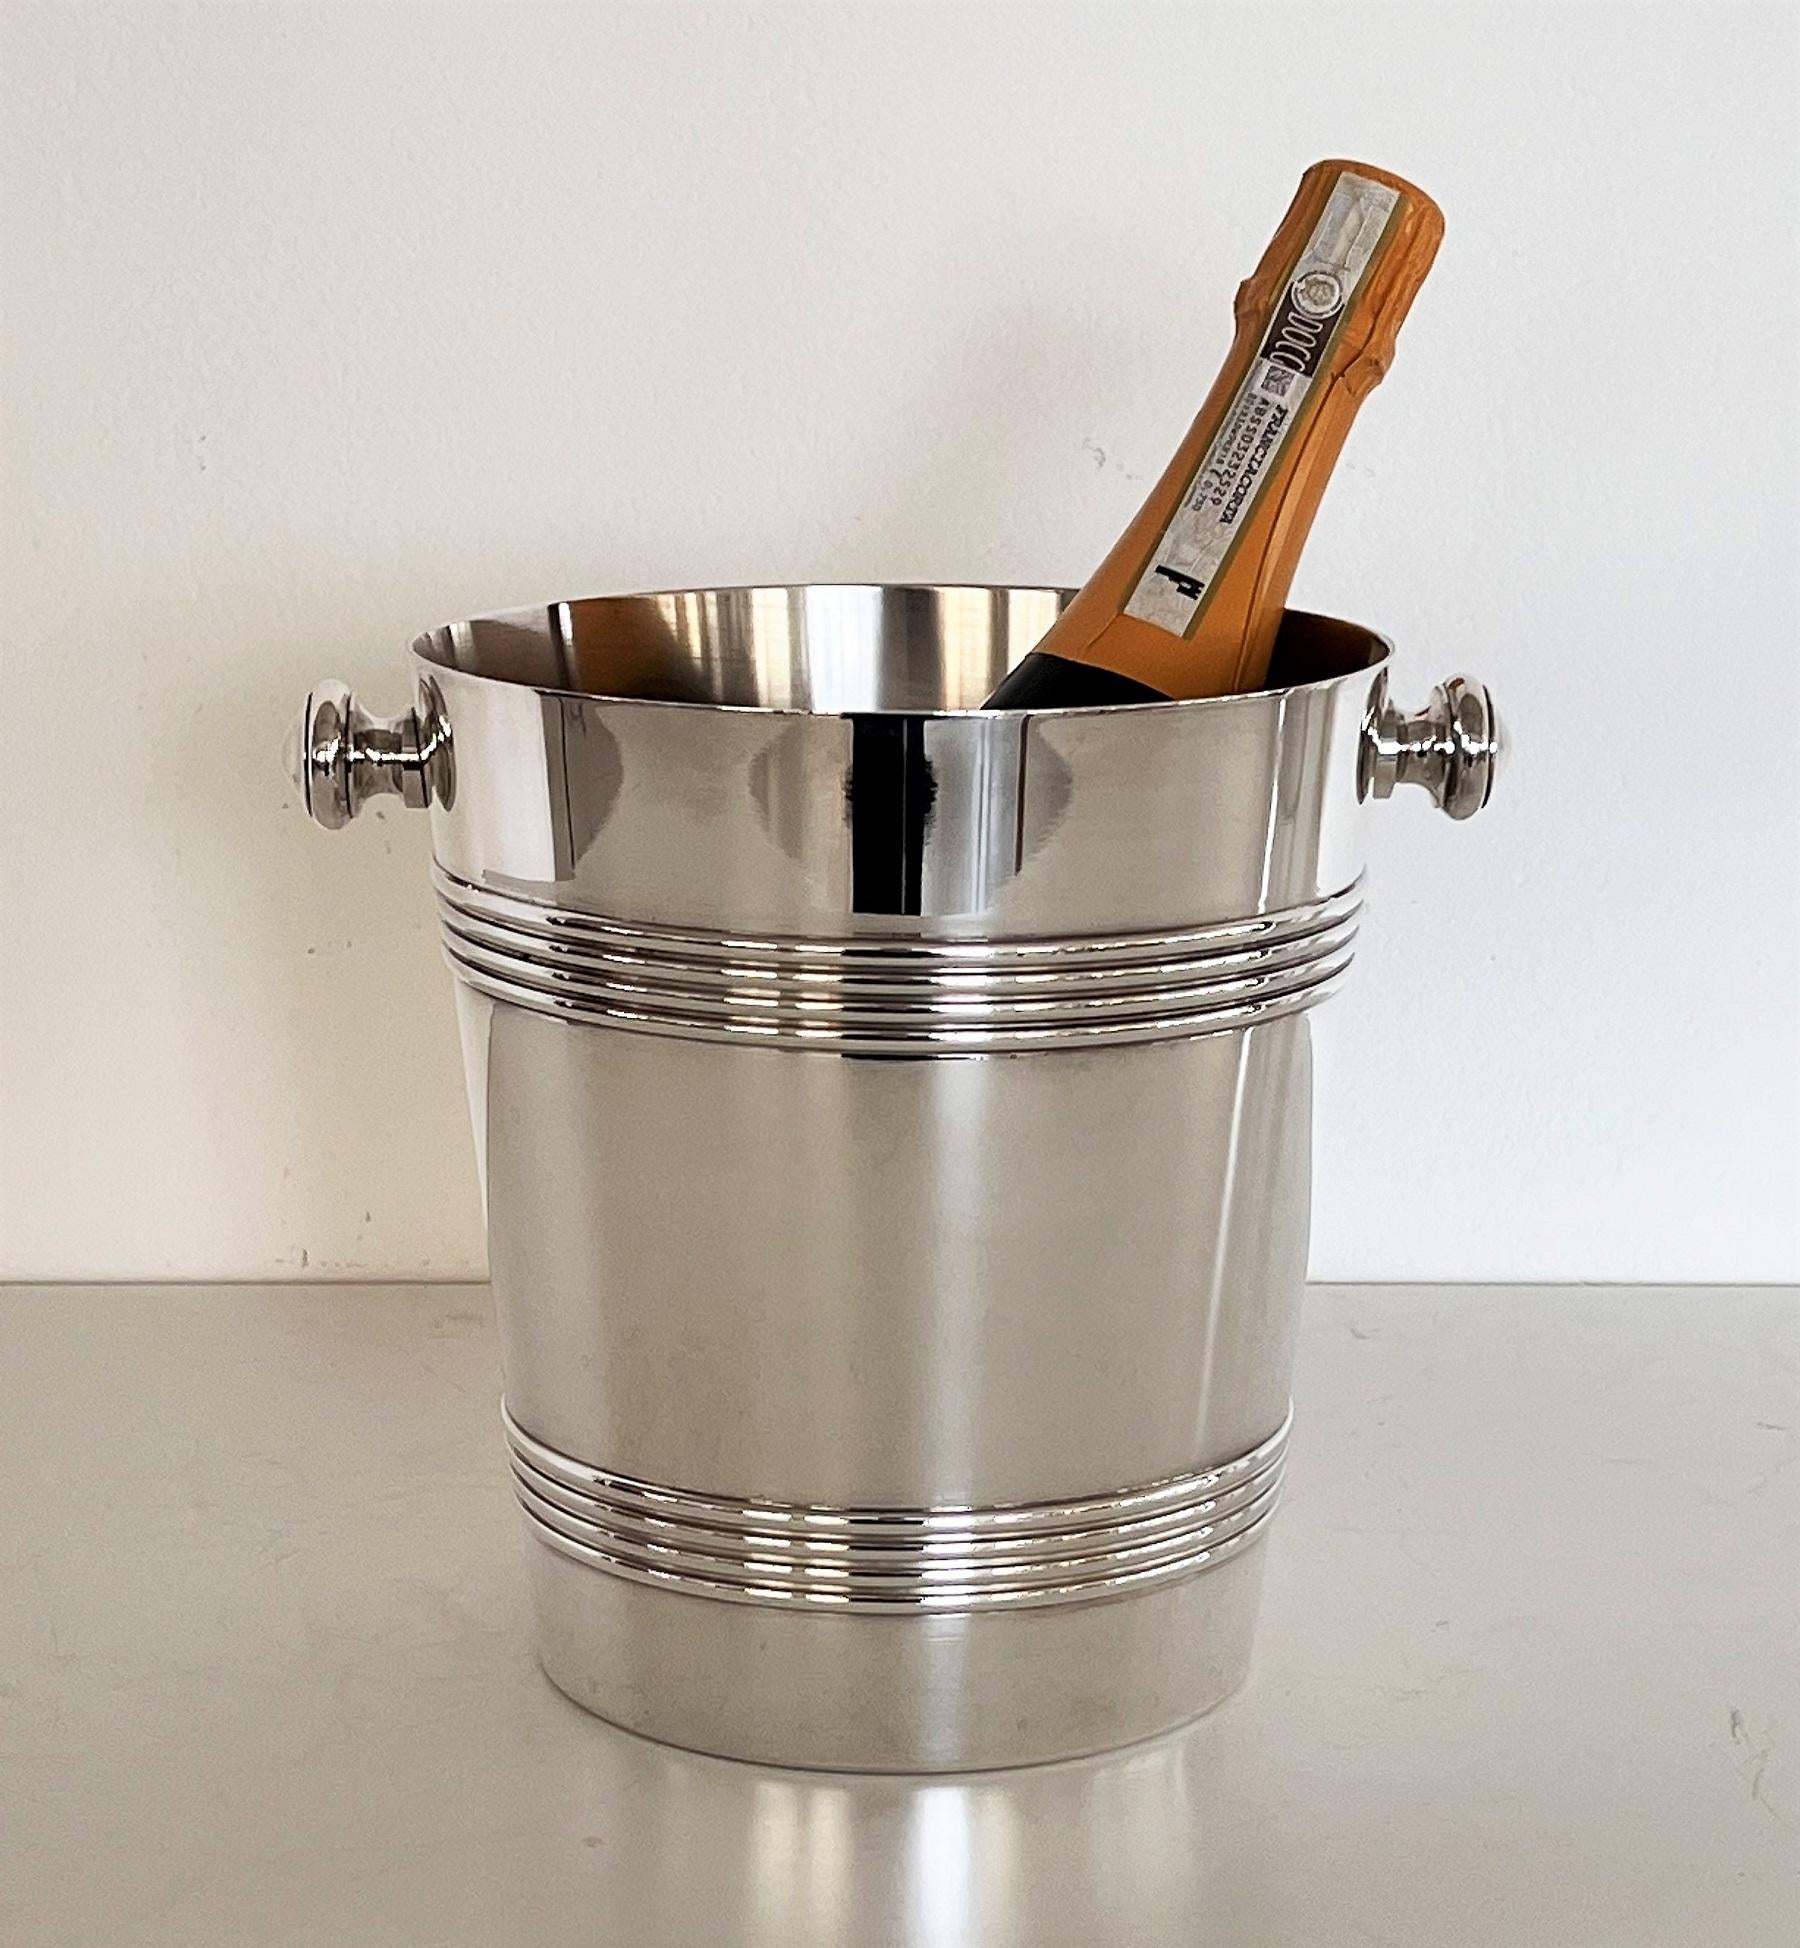 Gorgeous and shiny, Classic and timeless vintage Italian Broggi silver plated champagne or wine cooler is a stunning piece to keep forever.
Made in Italy in the 1980s and of very good craftsmanship.
It is very shiny (hard to photograph on the